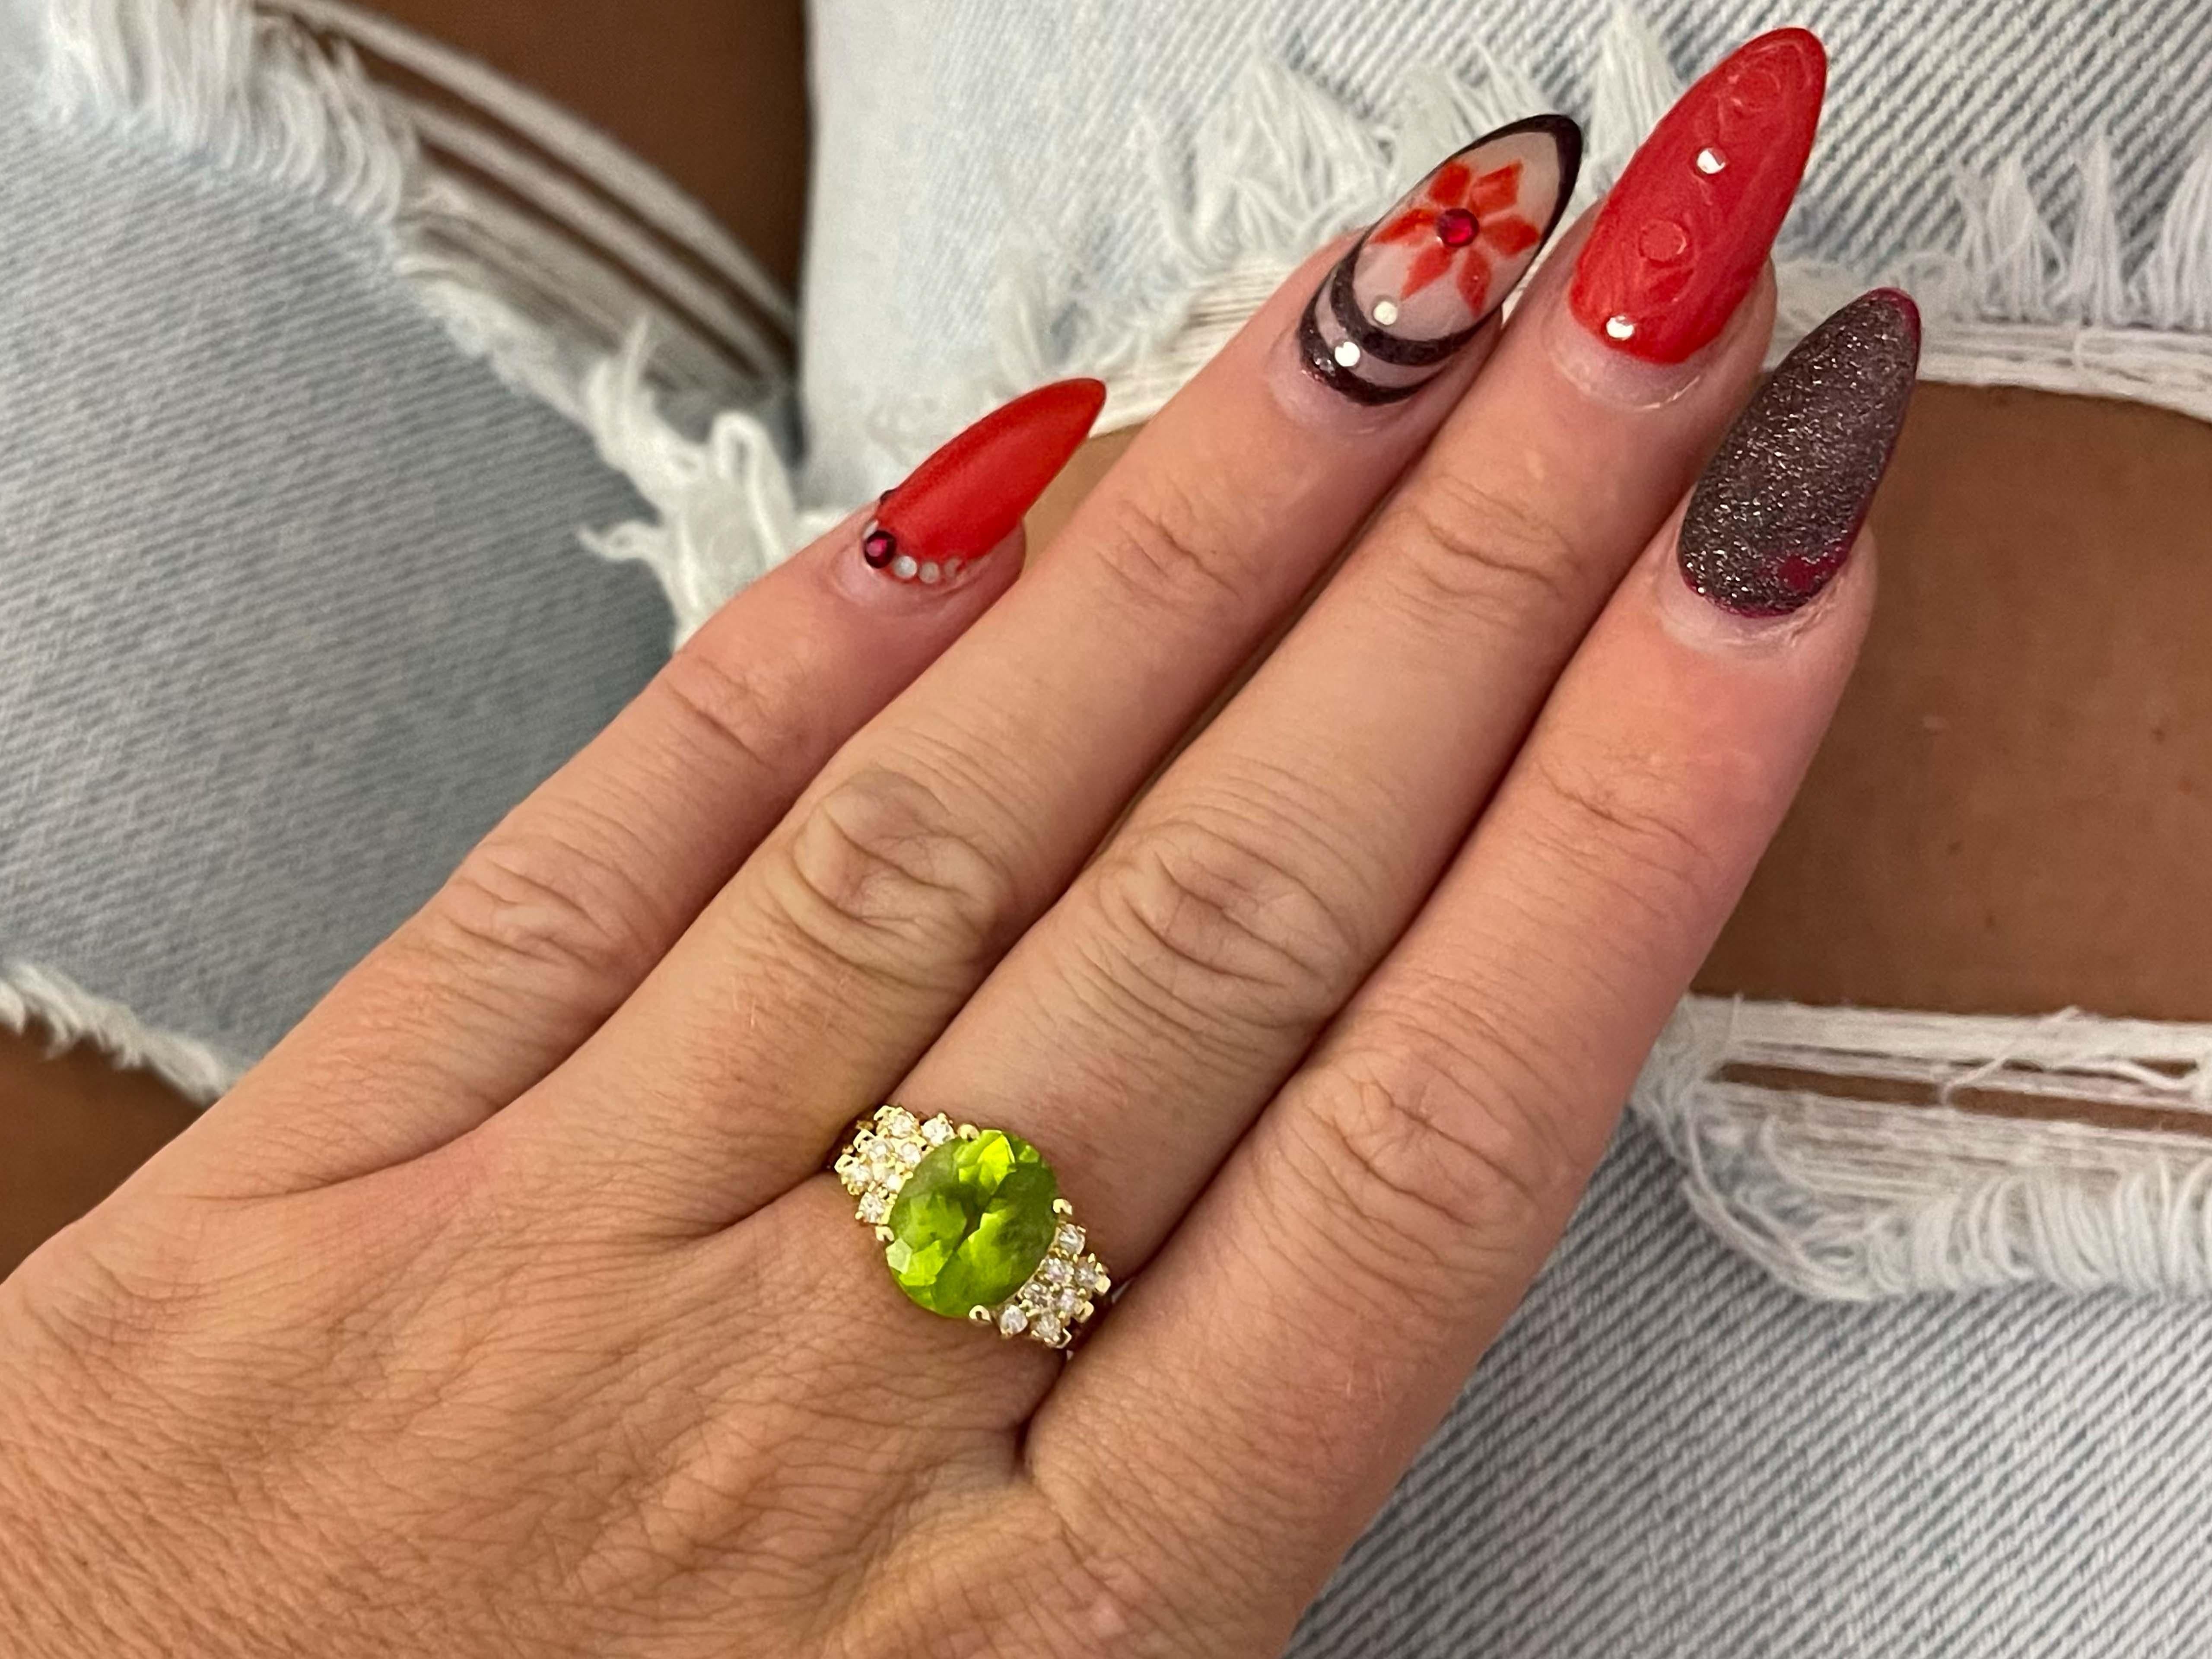 Item Specifications:

Style: Statement ring

Metal: 18k Yellow Gold

Ring Weight: 4.90 grams

Ring Size: 7

Ring Height: 10.86 mm

Gemstone Specifications:

Gemstone: Peridot

Topaz Measurements: 10.82 mm x 8.84 mm x 5.56

Topaz Carat Weight: ~3.36